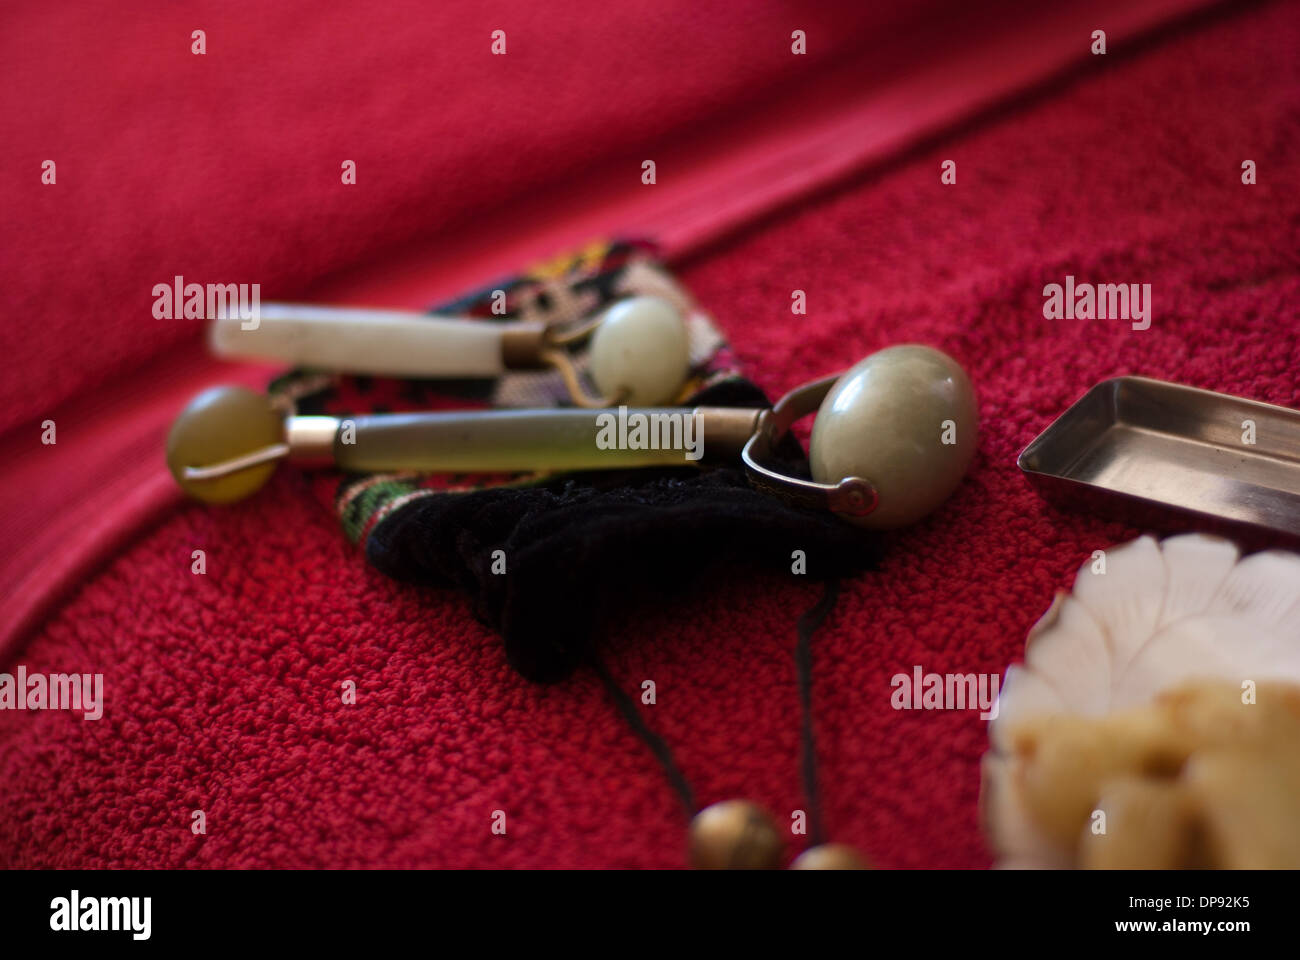 Two Jade rollers on an embroidered pouch on a luxurious red spa towel. Stock Photo